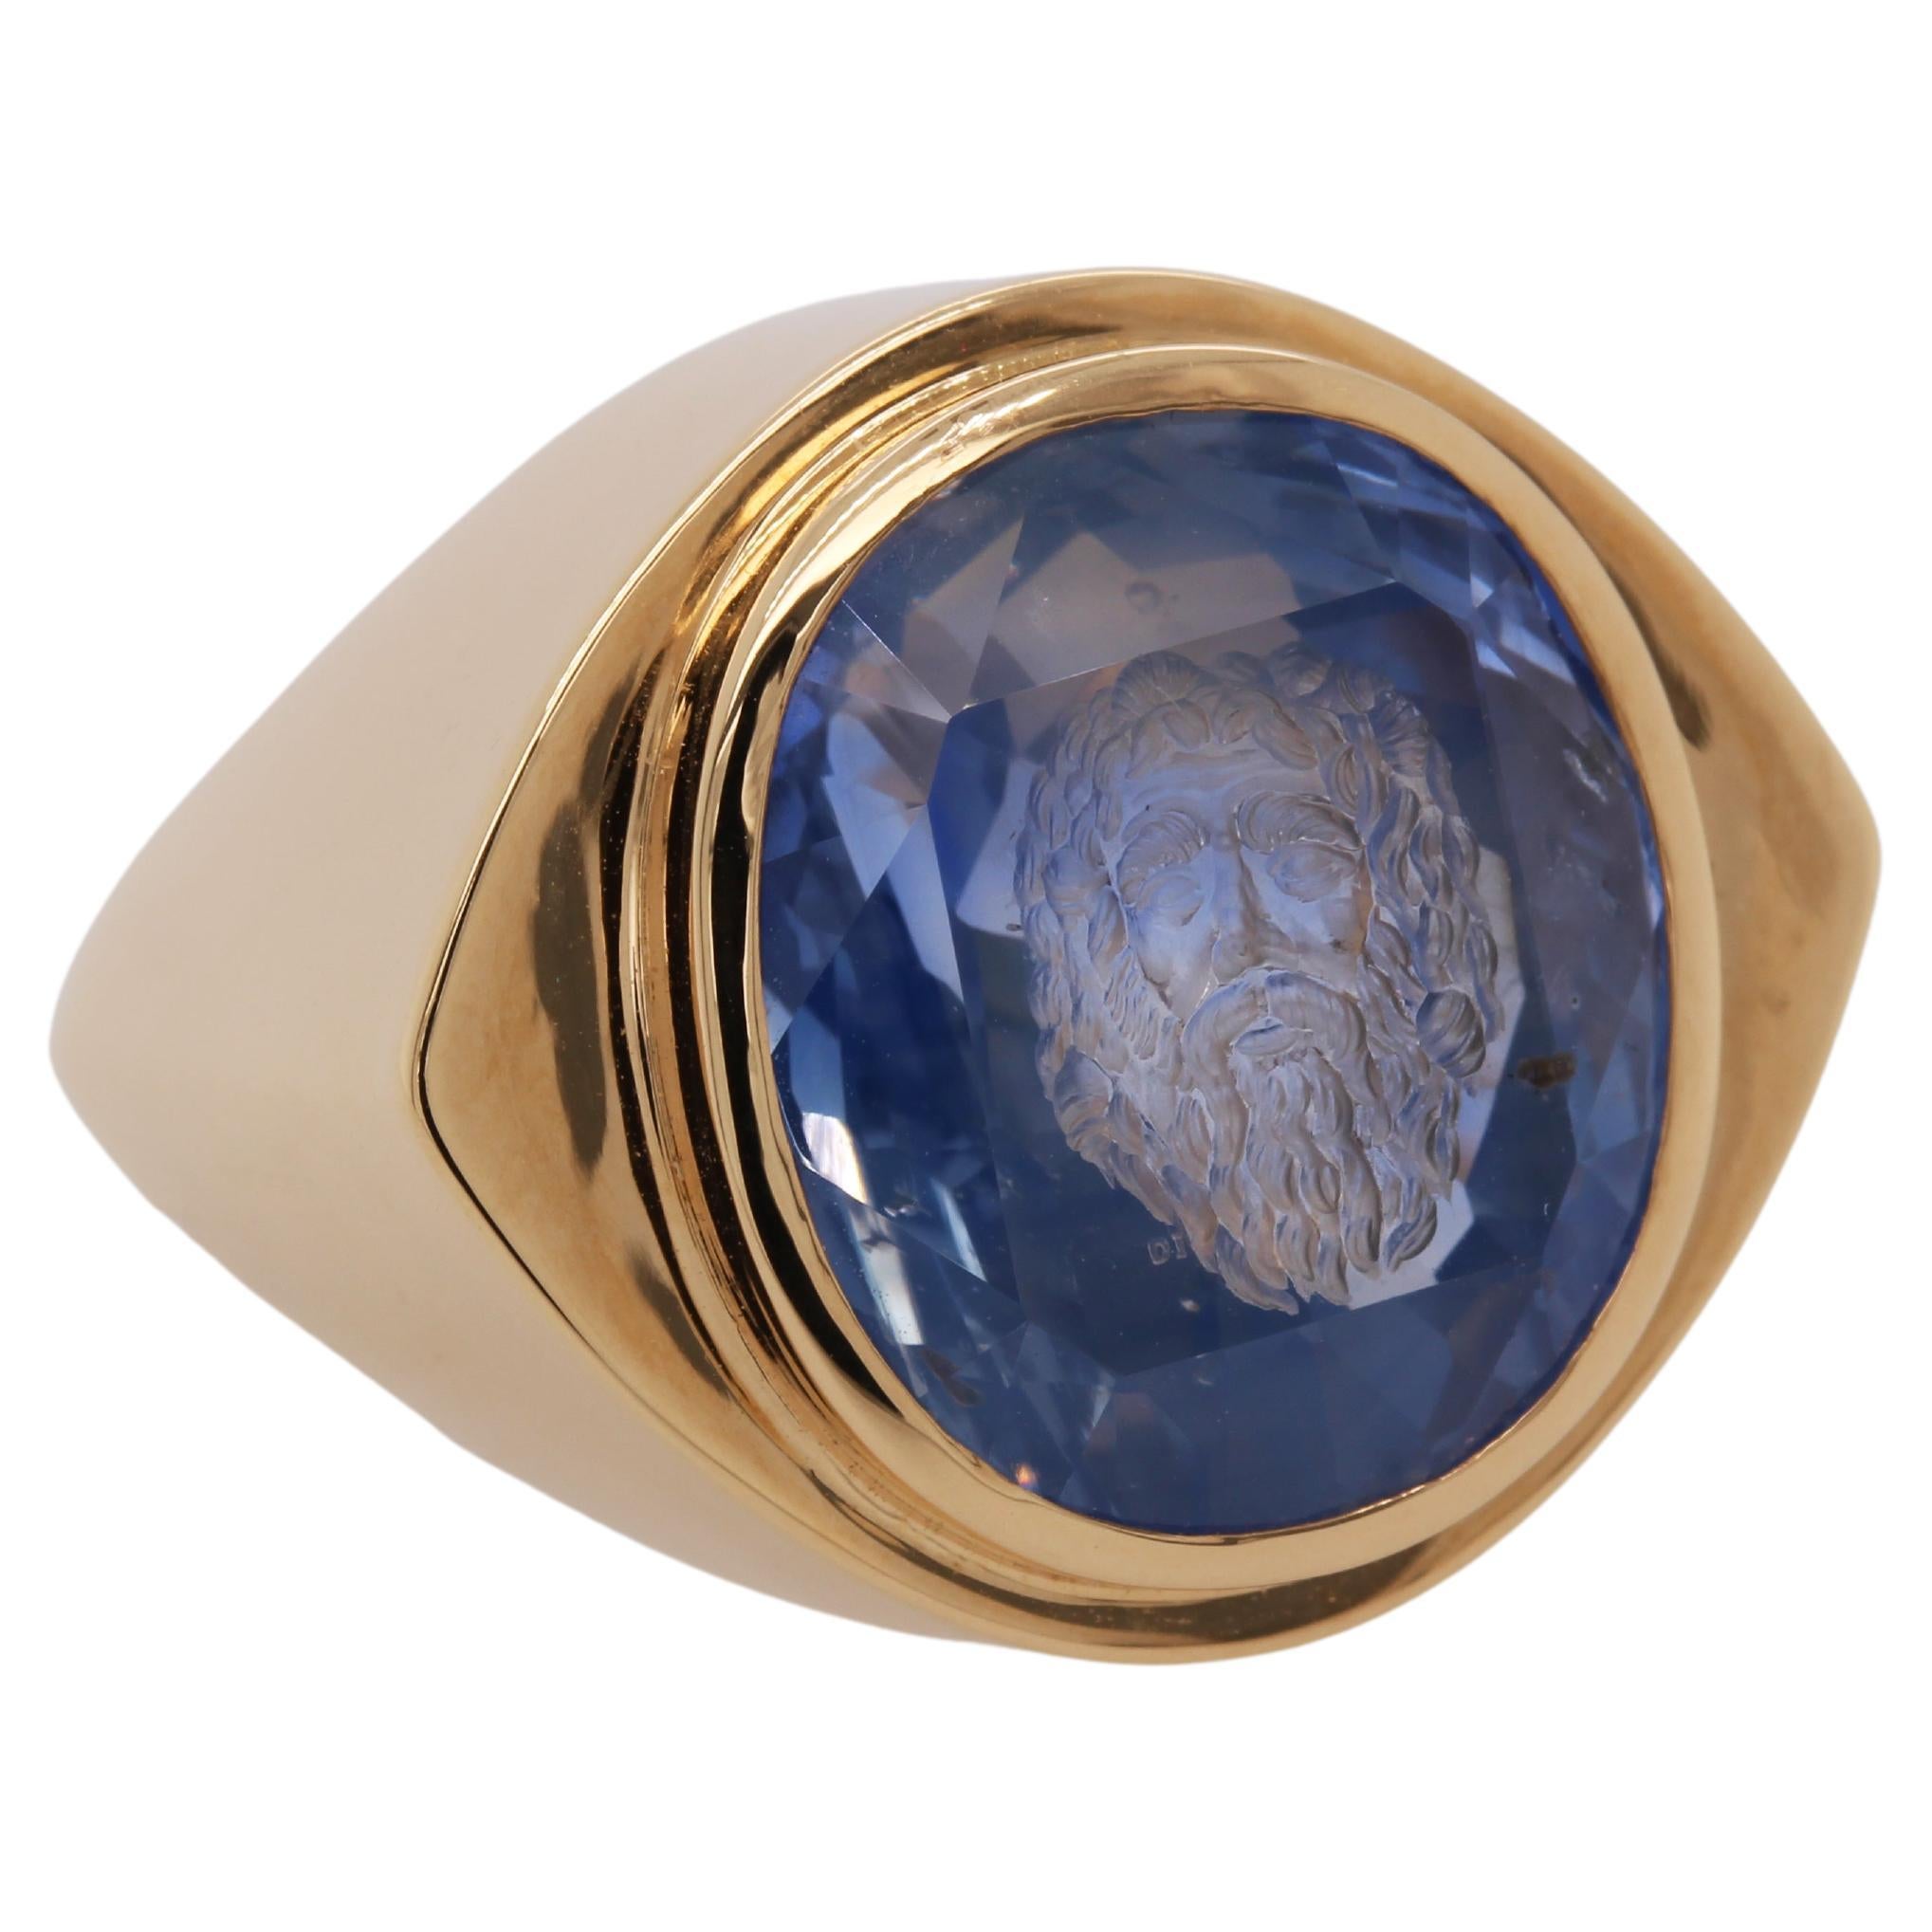 Castellani GIA 20.64ct Sapphire Hand Carved Intaglio 18kt Ring